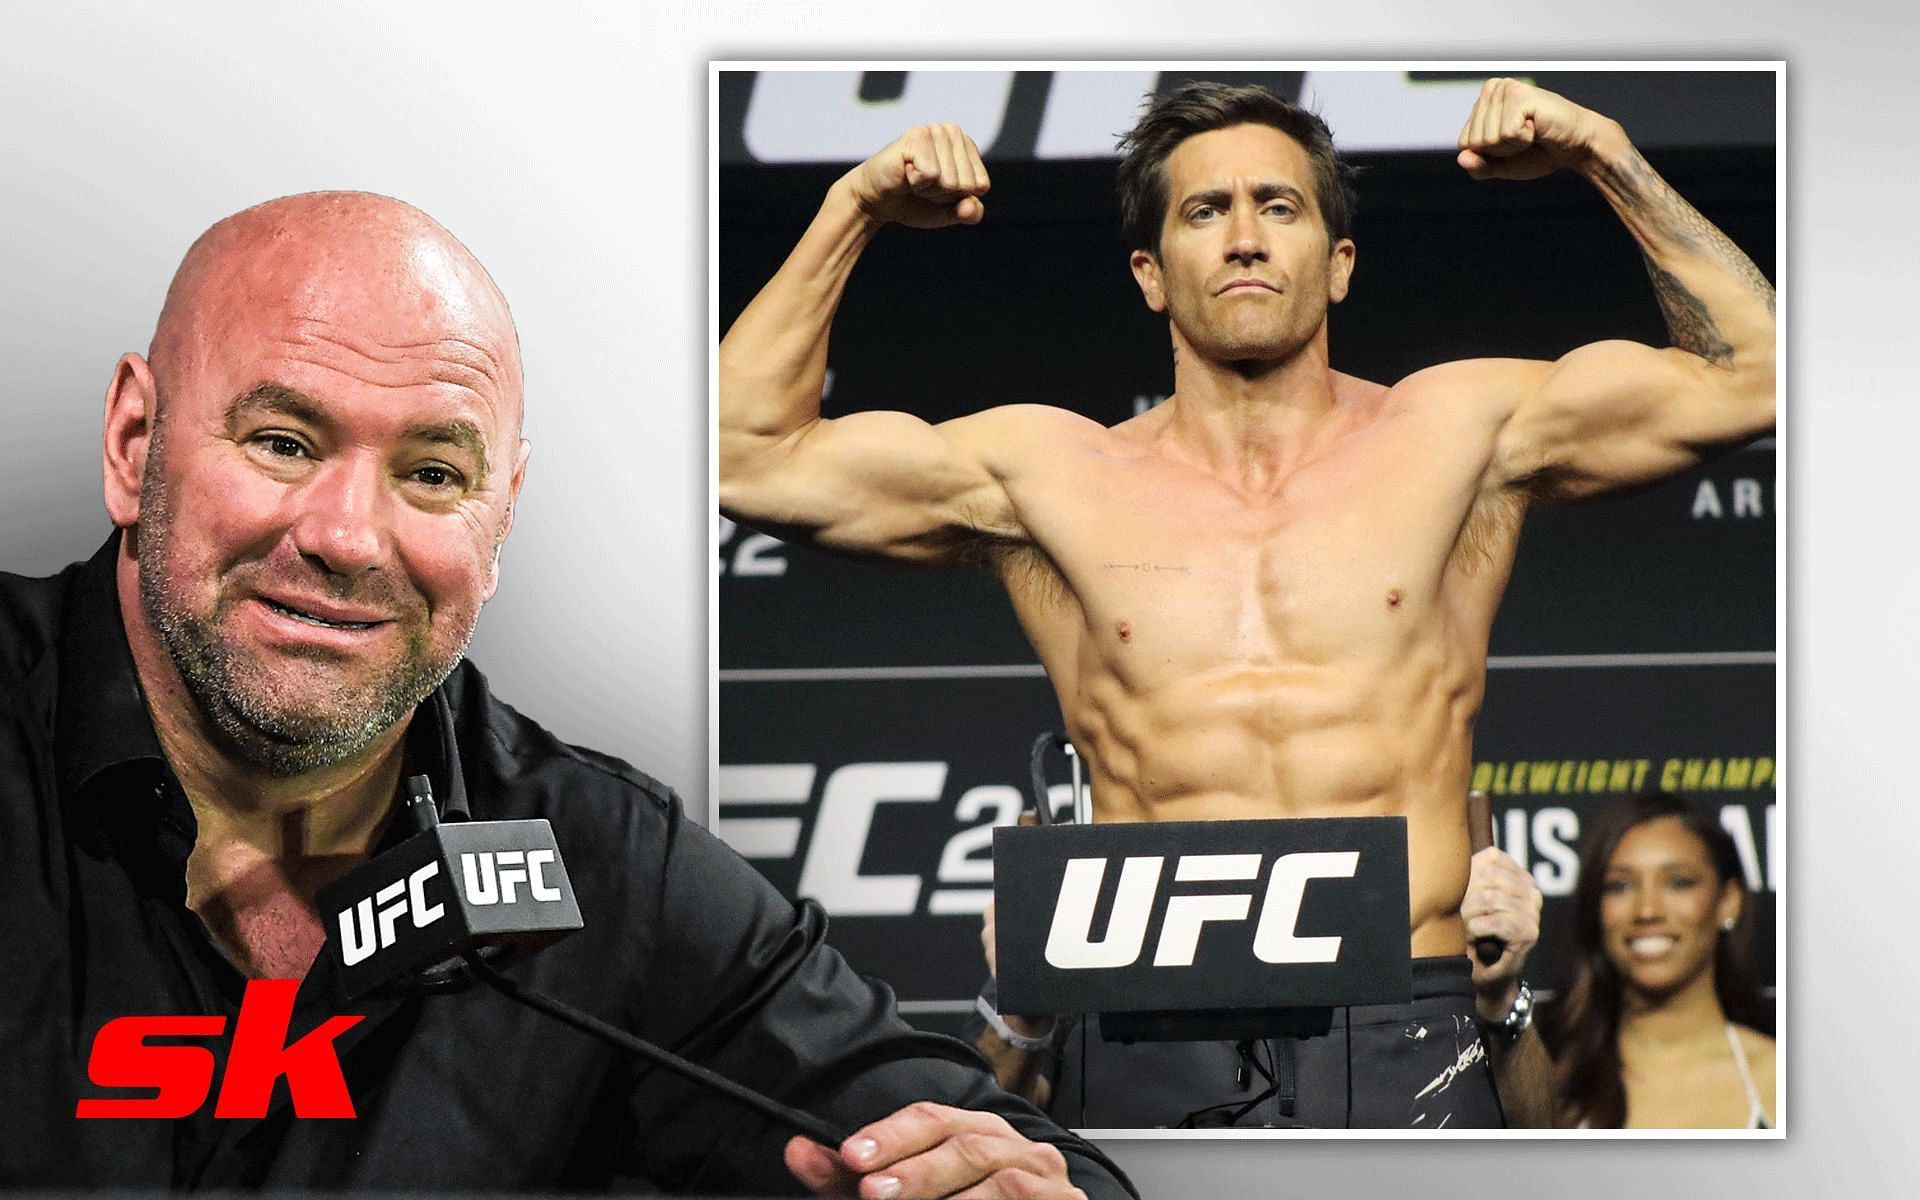 Dana White (left) and Jake Gyllenhaal (right). [Images courtesy: left image from Getty Images and right image from Twitter @SandhuMMA]